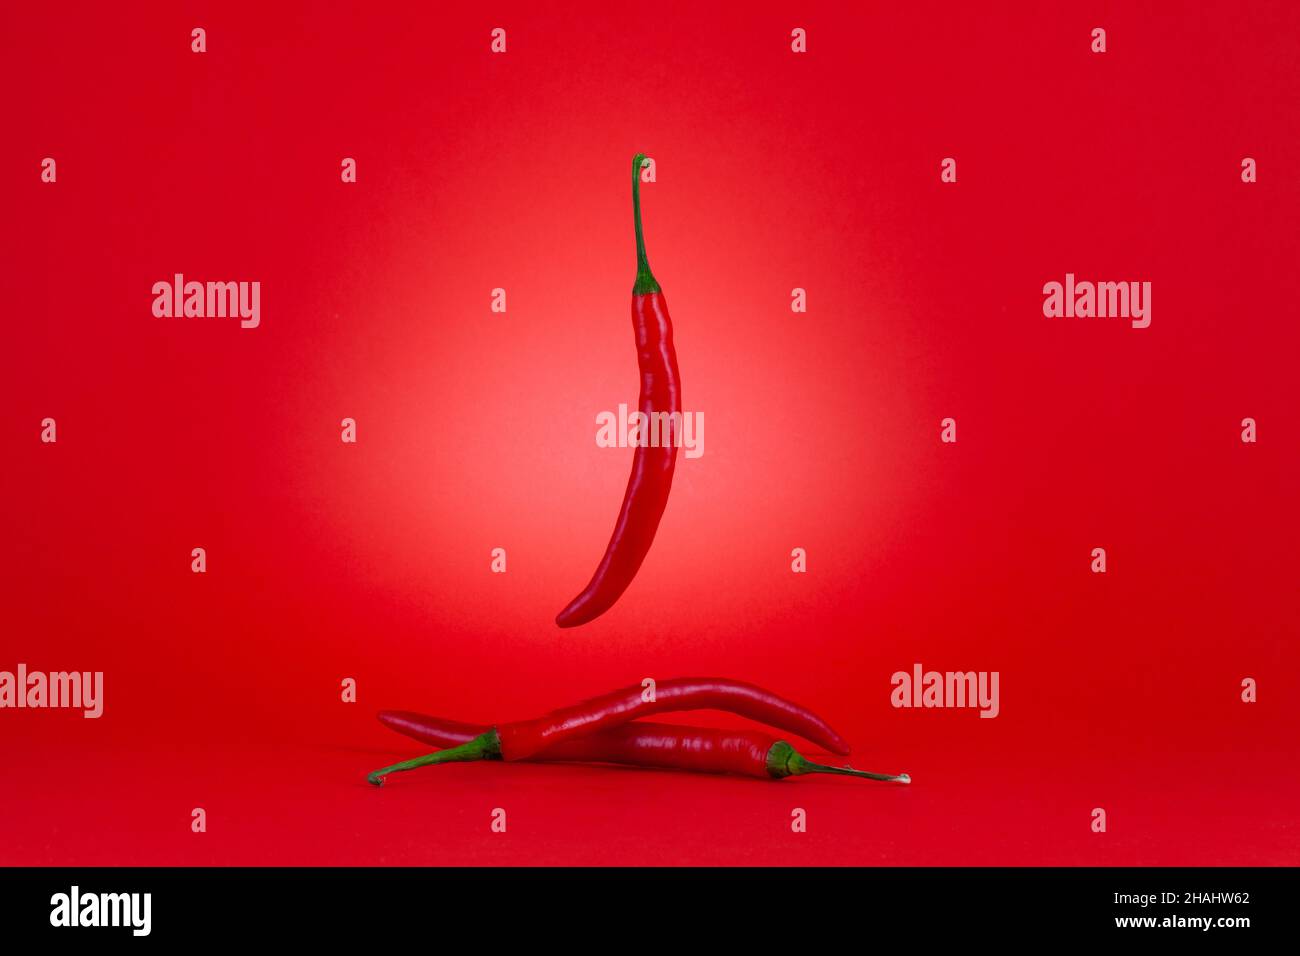 Three of Chili peppers isolated on red background.Ripe red hot chili peppers. Stock Photo